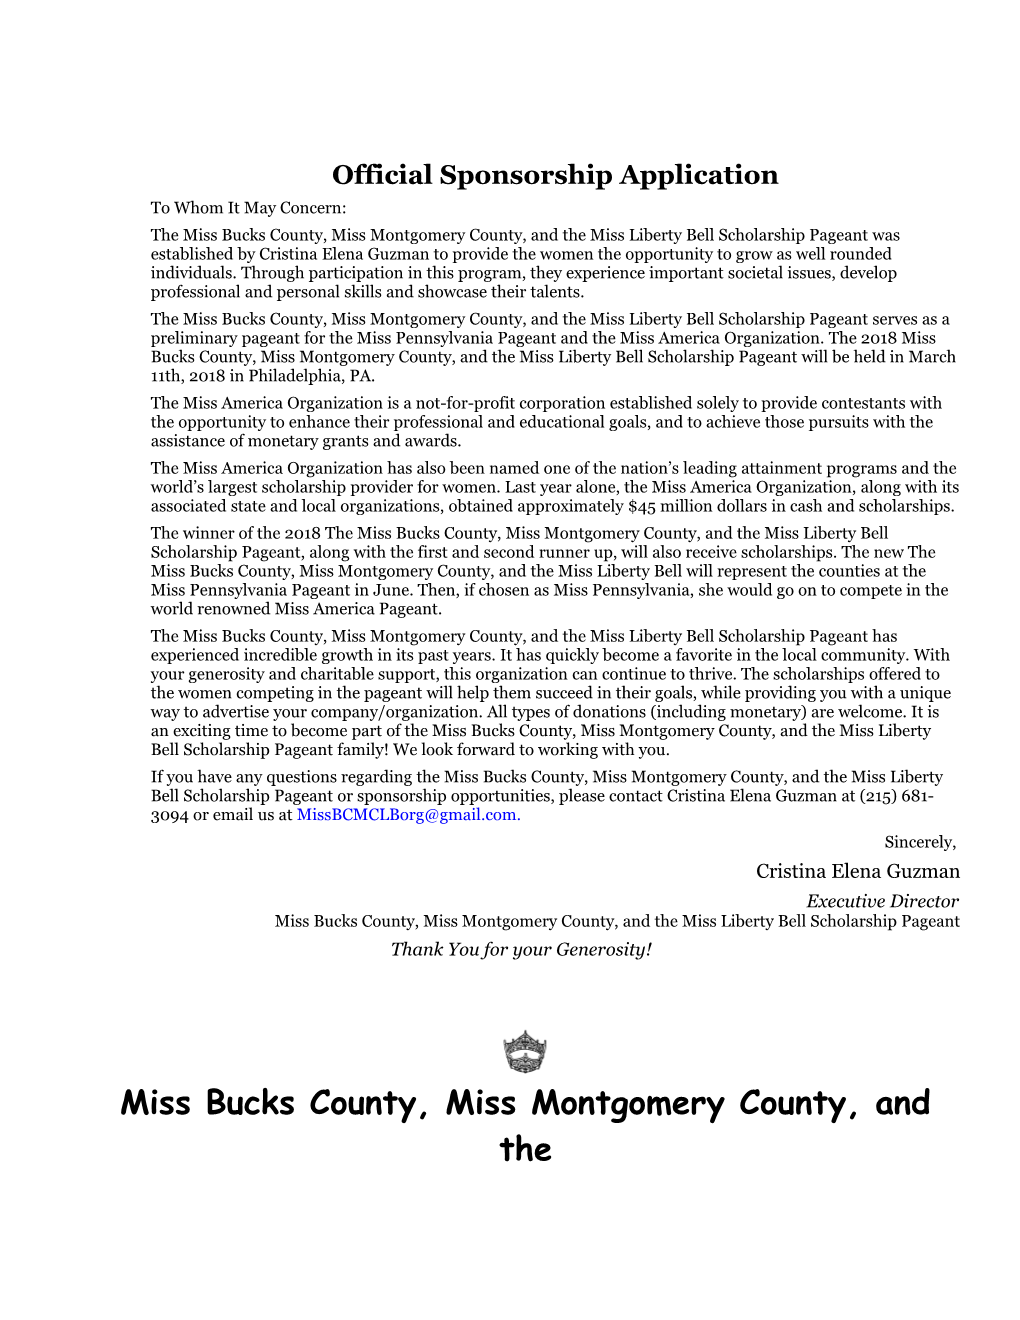 Miss Bucks County, Miss Montgomery County, and Miss Liberty Bell Scholarship Pageant